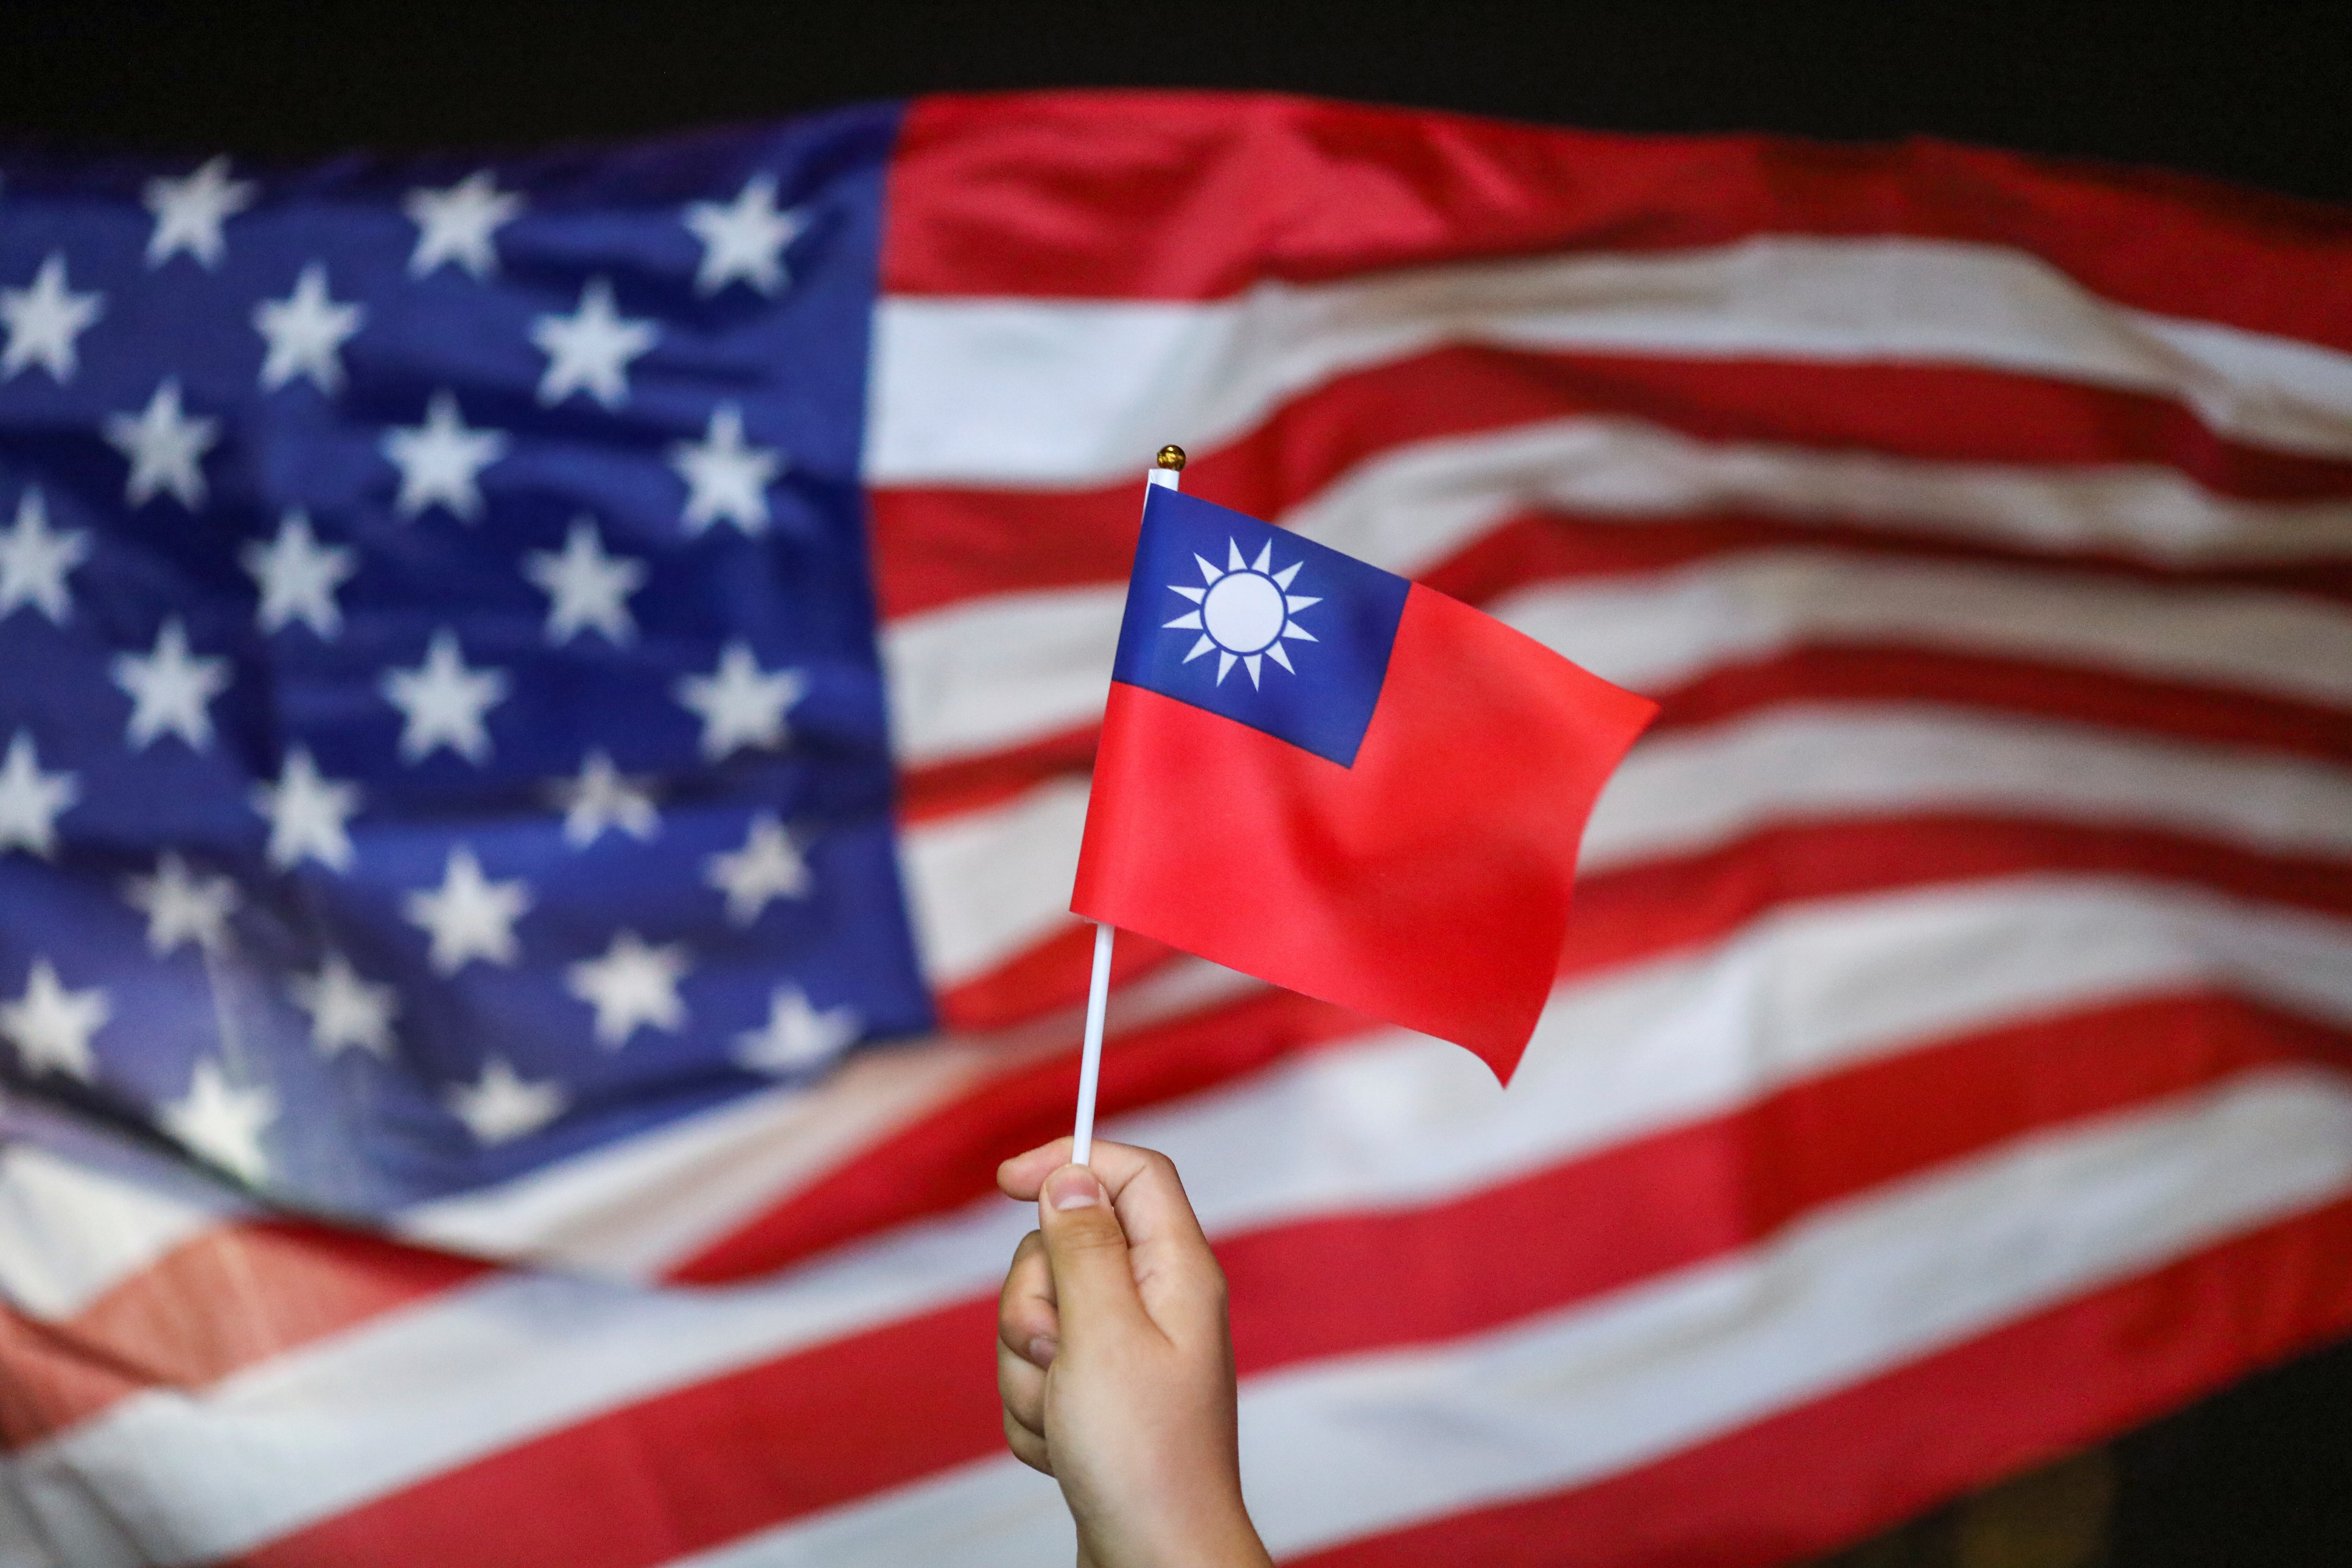 Washington and Taipei have signed a number of deals to work more closely together. Photo: Reuters